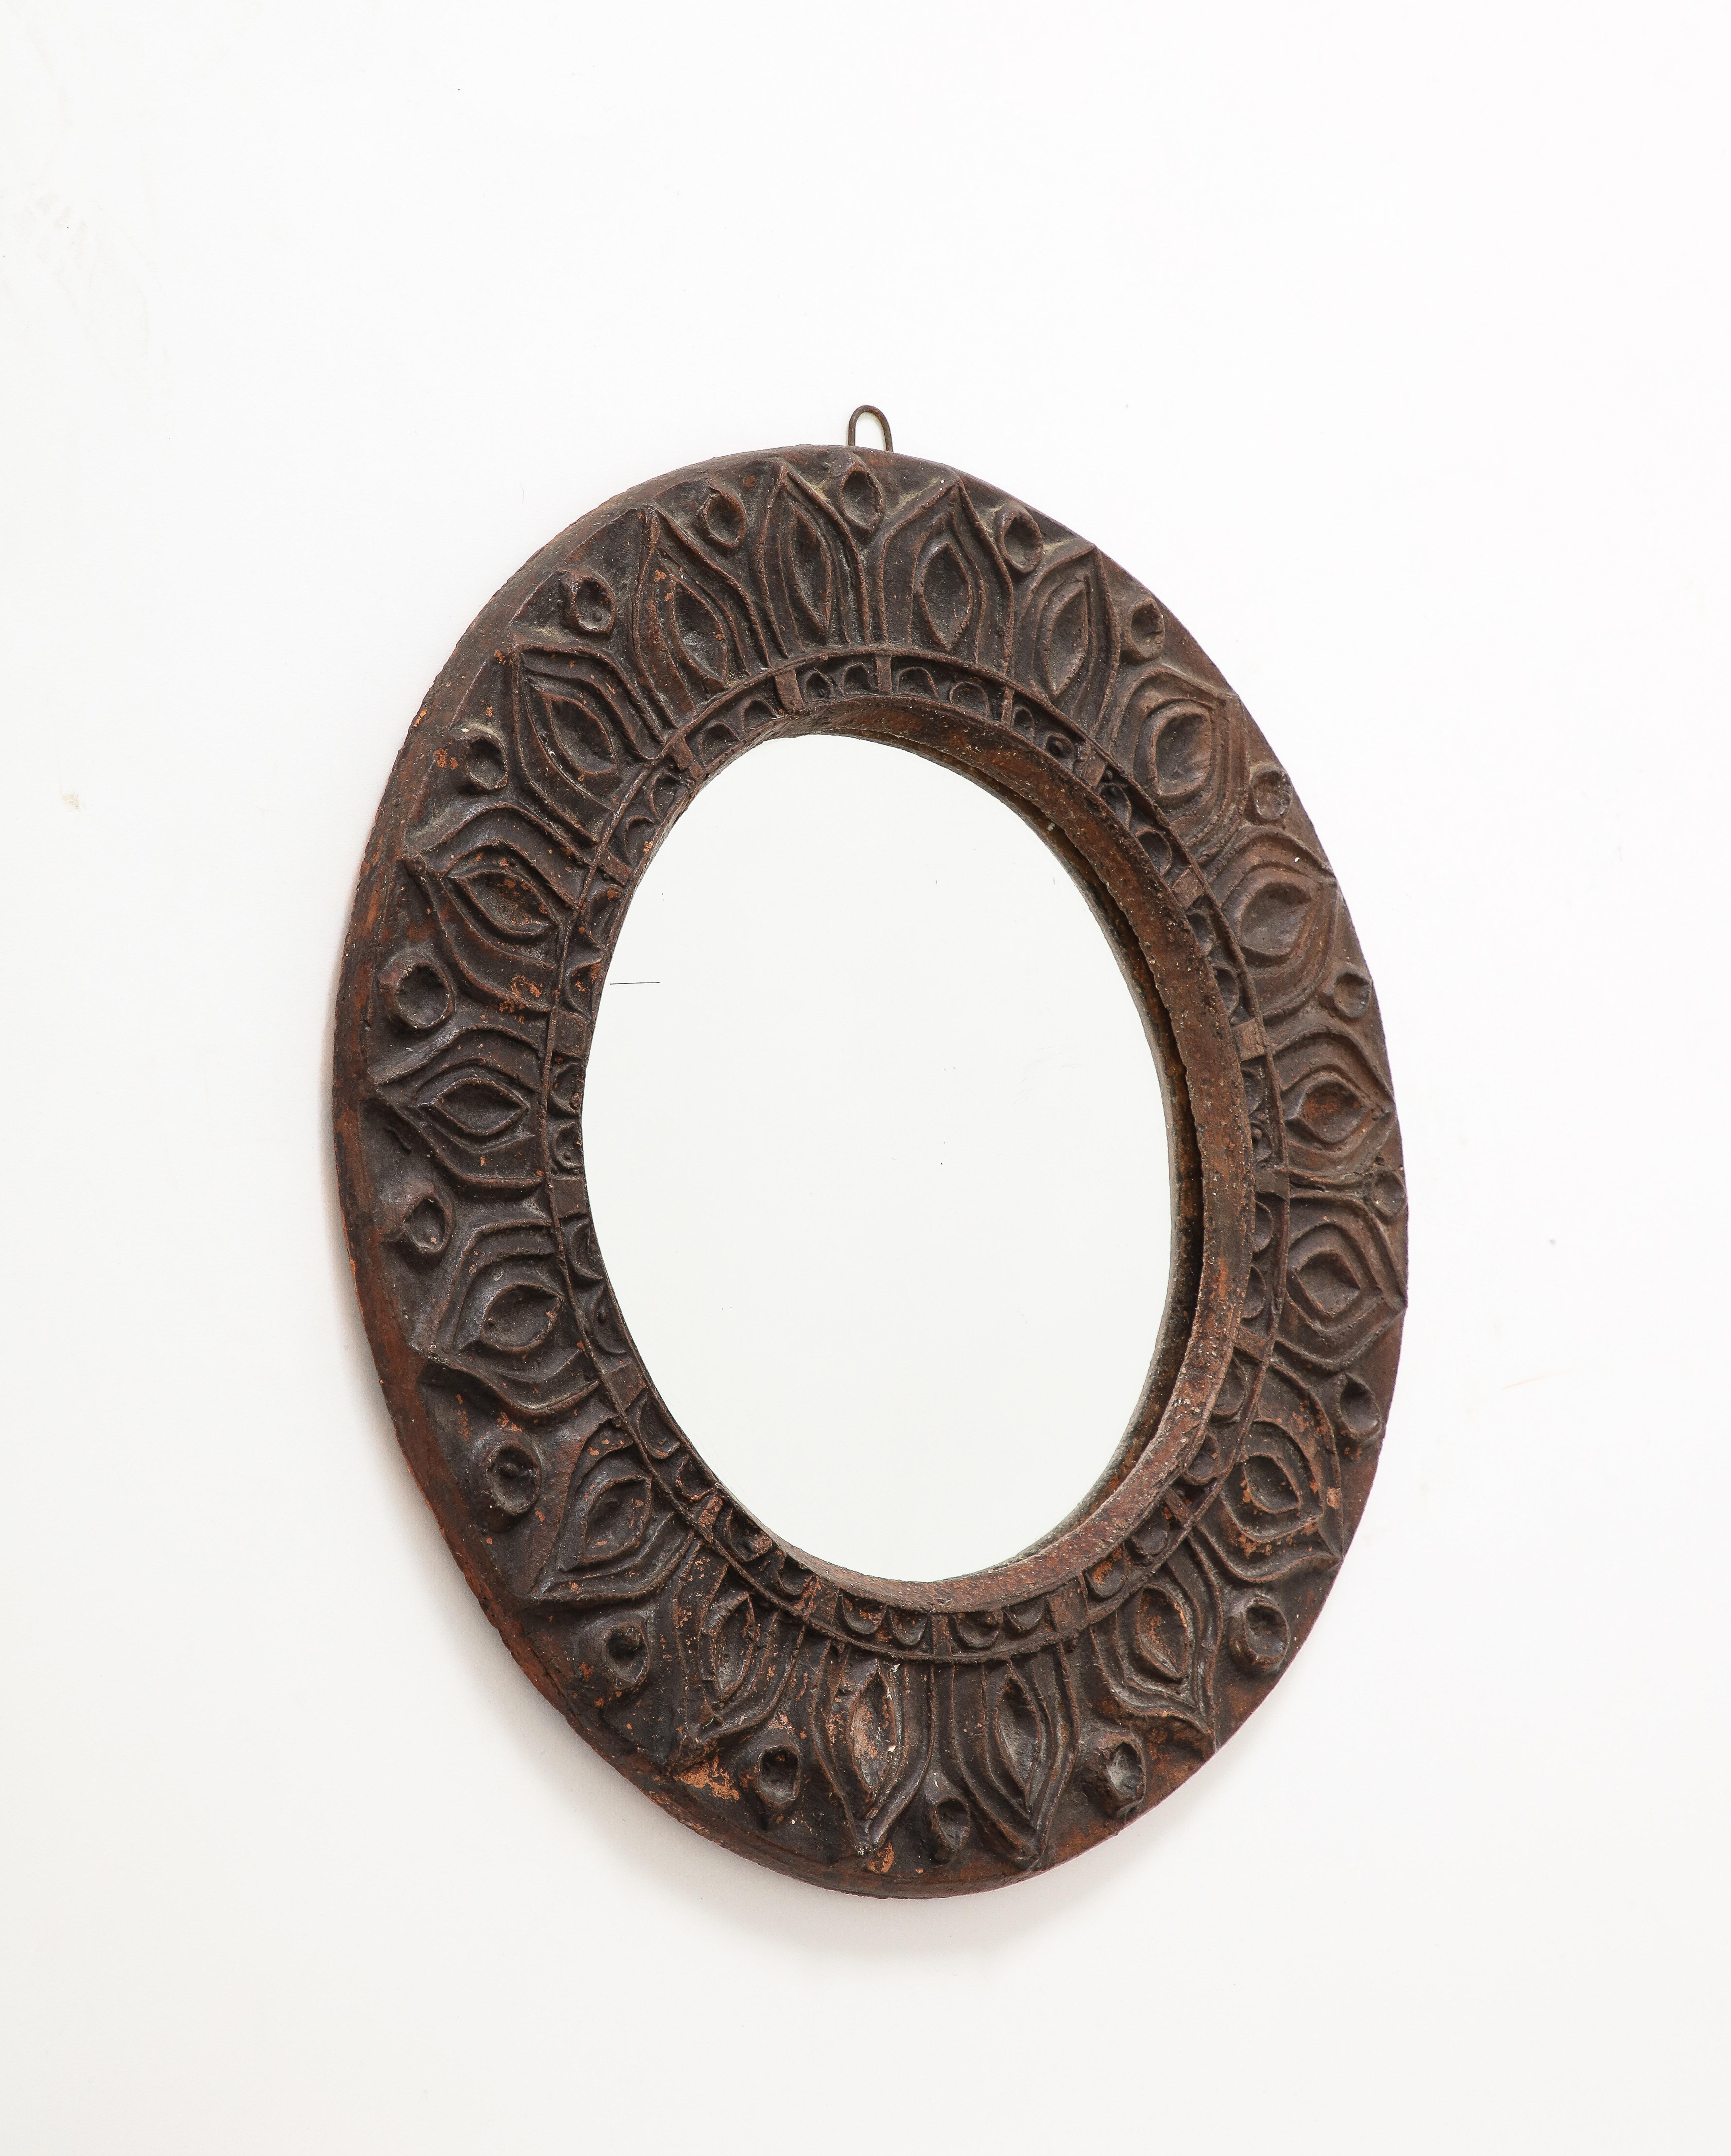 Dark brown etched terracotta mirror. Possibly from Vallauris, France.
In fair vintage condition.

